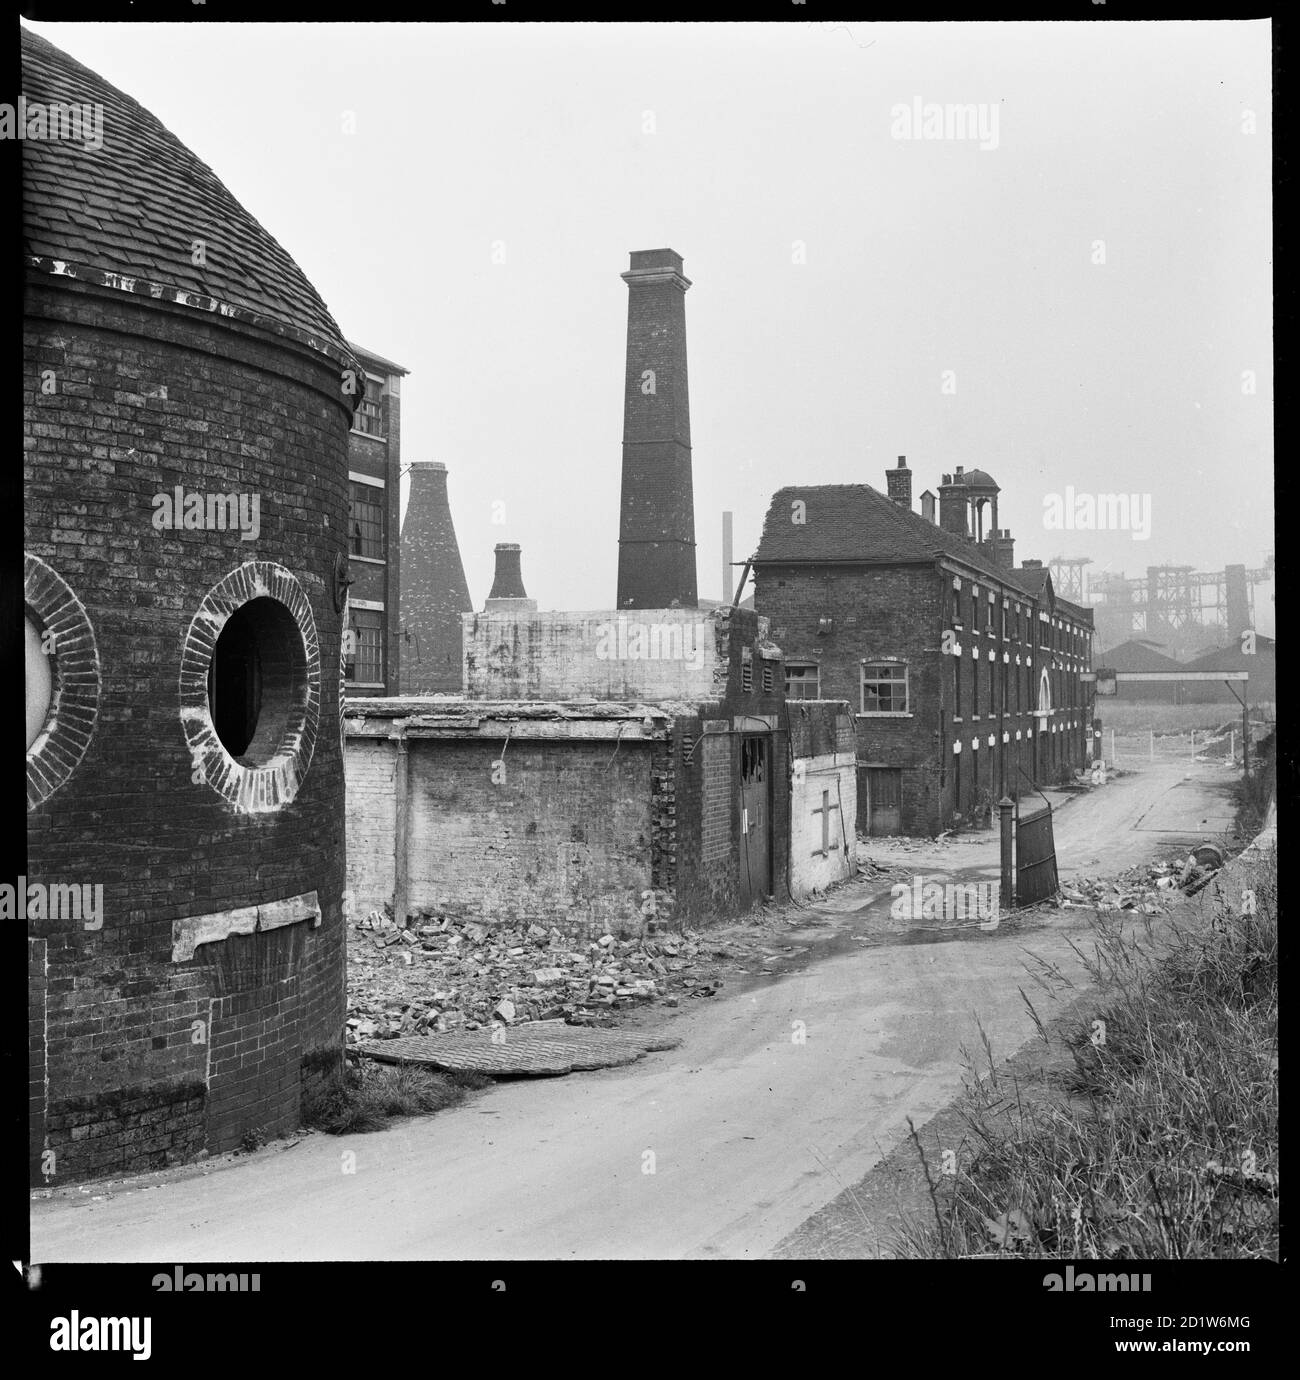 Josiah Wedgwood's Etruria Pottery Works during demolition, viewed from towpath of the Trent and Mersey Canal with the Round House in the foreground, Etruria Road, Etruria, Stoke-on-Trent, Staffordshire, UK.   Josiah Wedgwood opened his Etruria Works beside the Trent and Mersey Canal in 1769. A new factory was constructed at Barlaston in 1938 and production was gradually shifted away from Etruria. The Round House (built circa 1769), said to have been used for grinding raw materials, as a counting house, and as a stable, is now the only surviving structure. Stock Photo